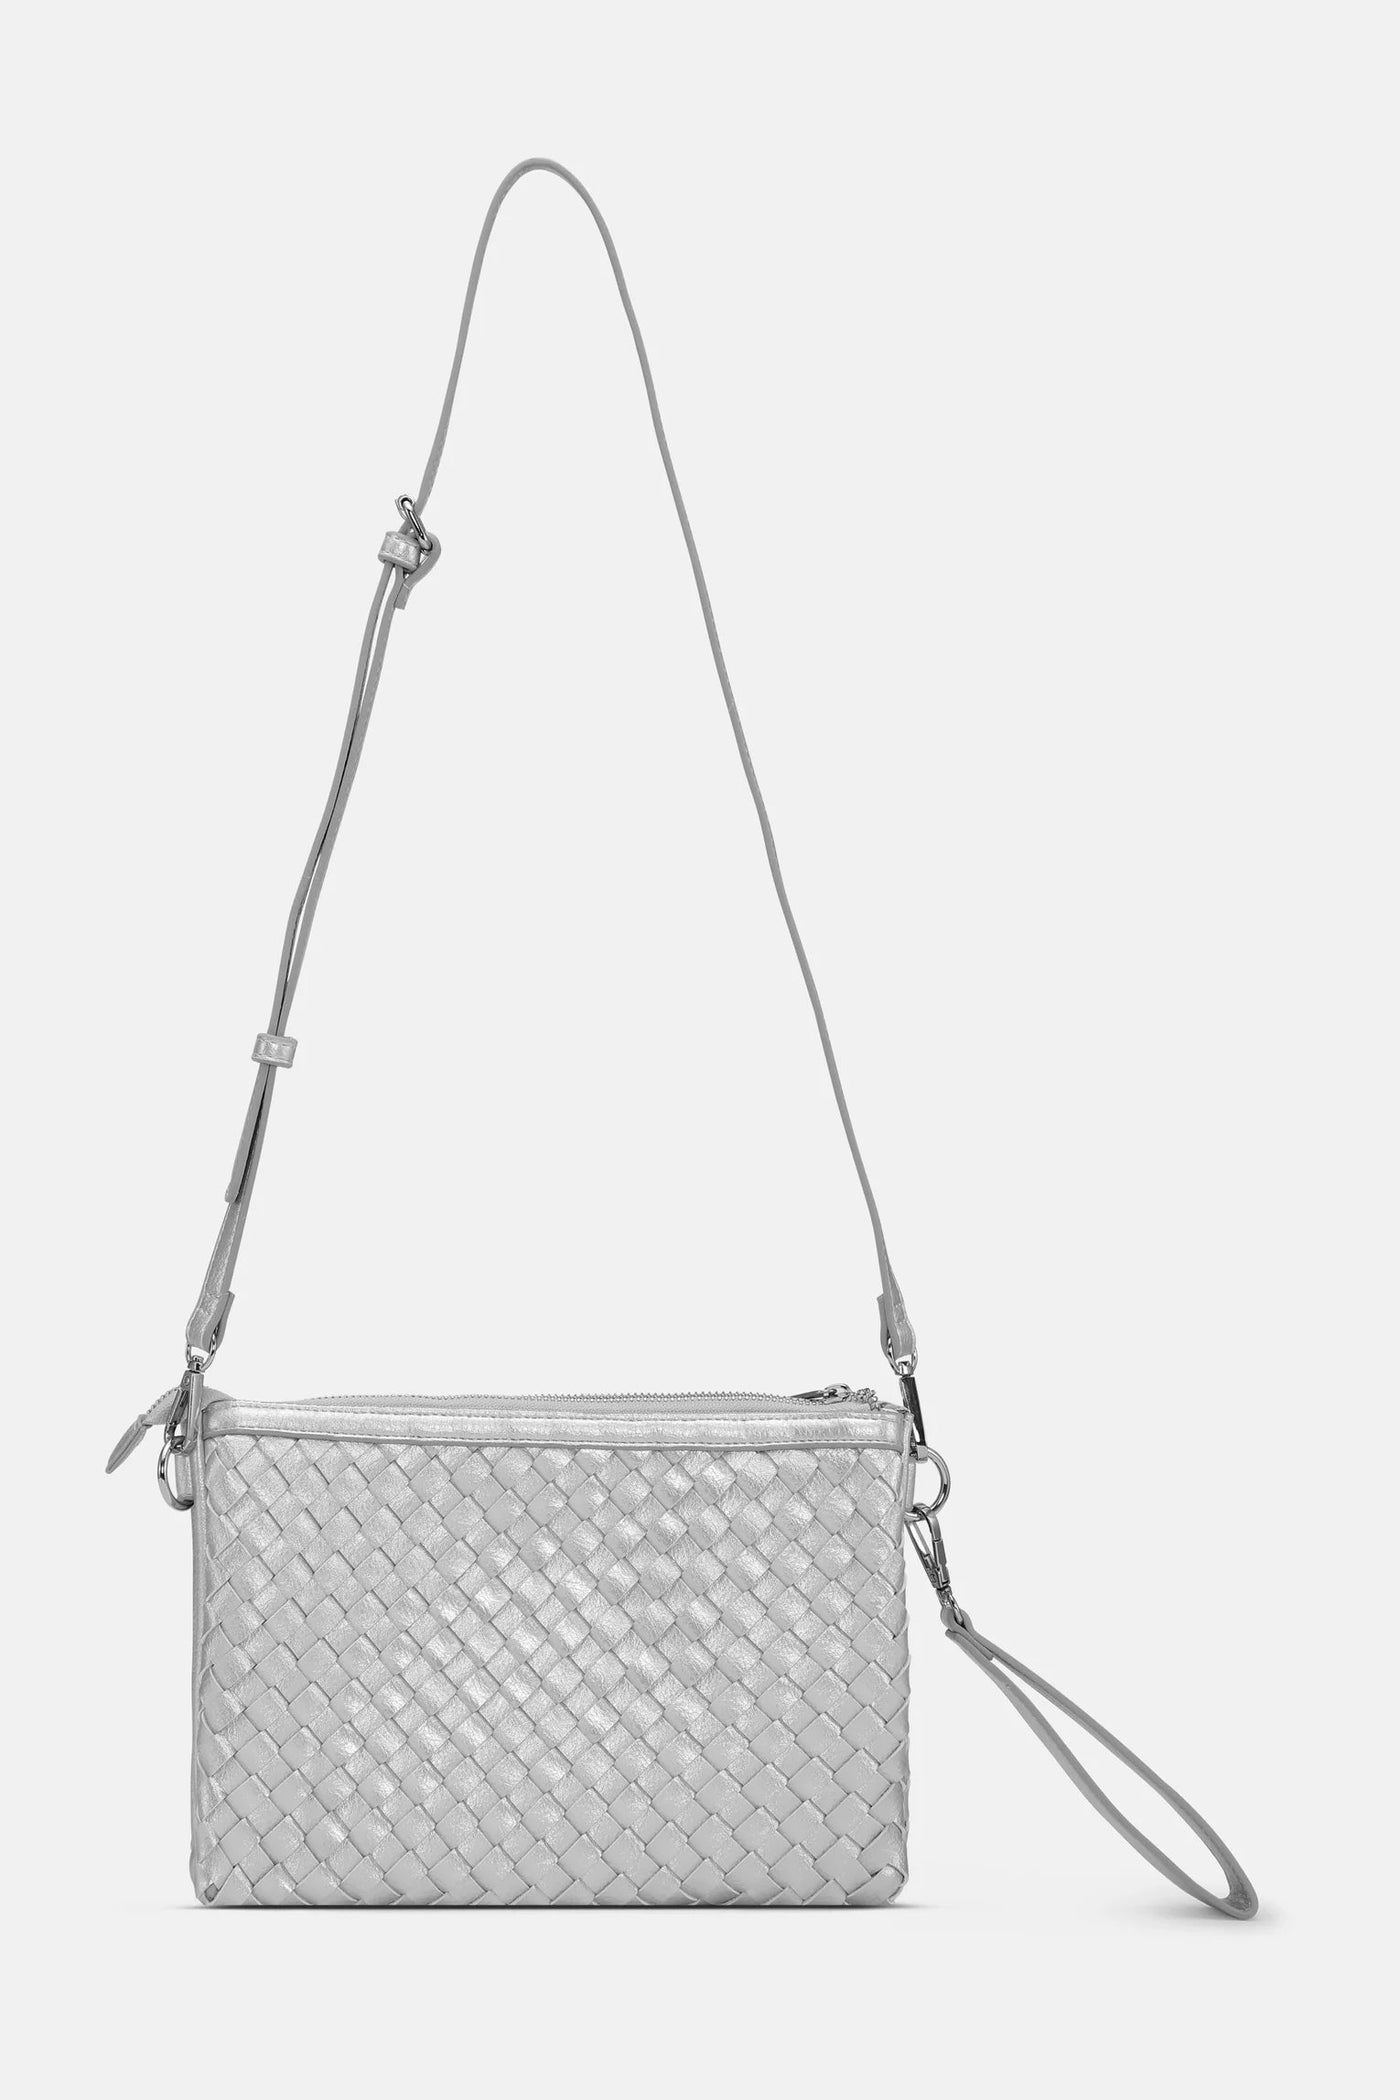 Ilse Jacobsen Silver Clutch-Womens-Ohh! By Gum - Shop Sustainable